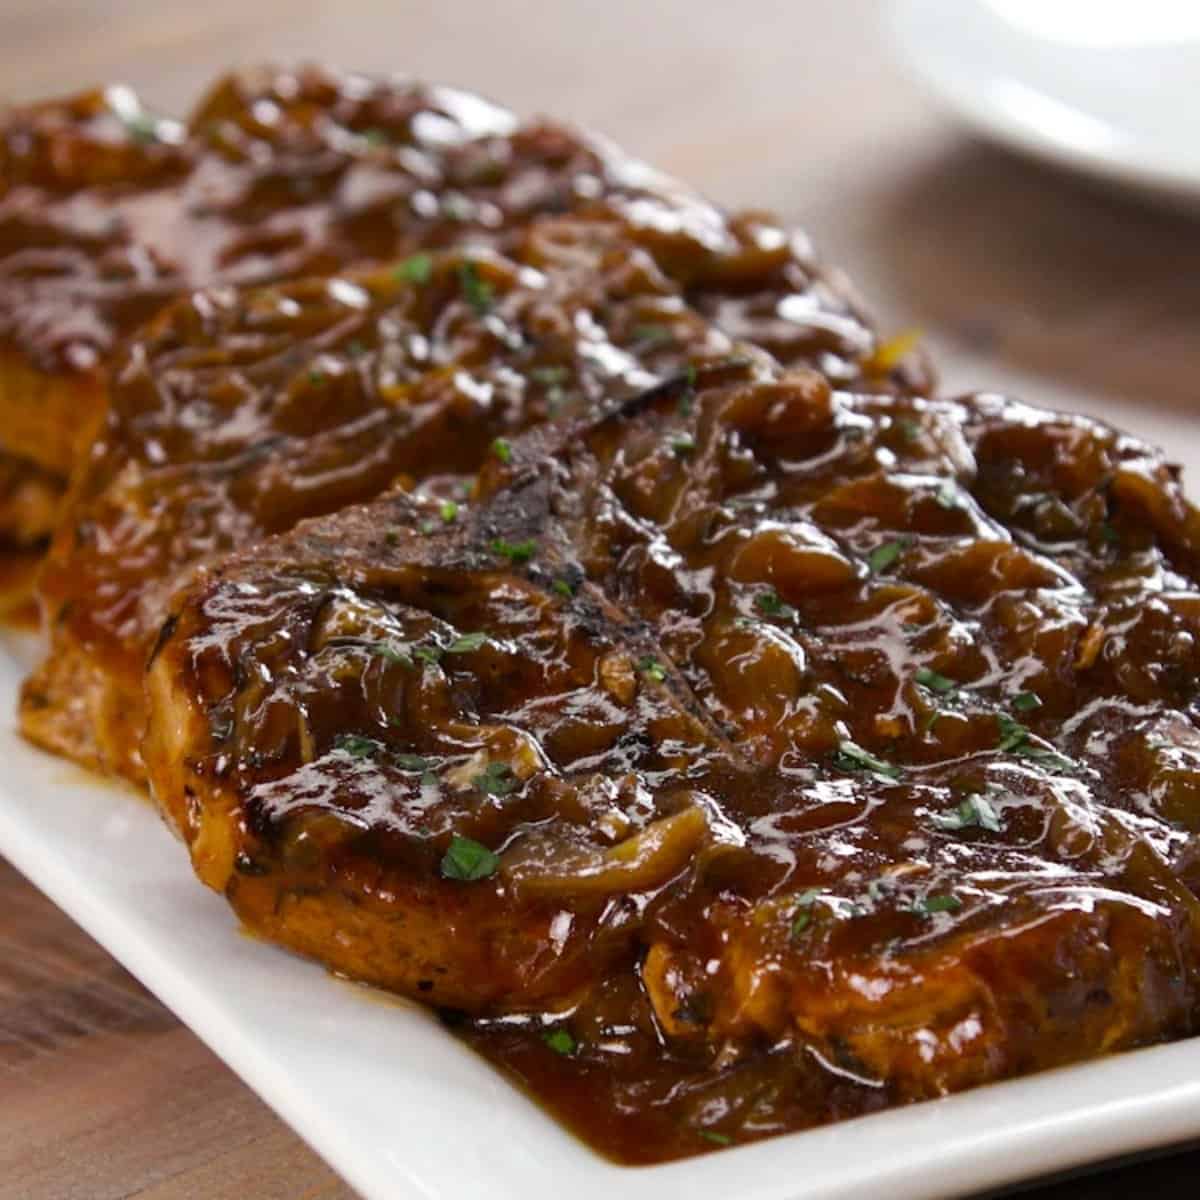 Tray of slow cooked pork chops with onion gravy.